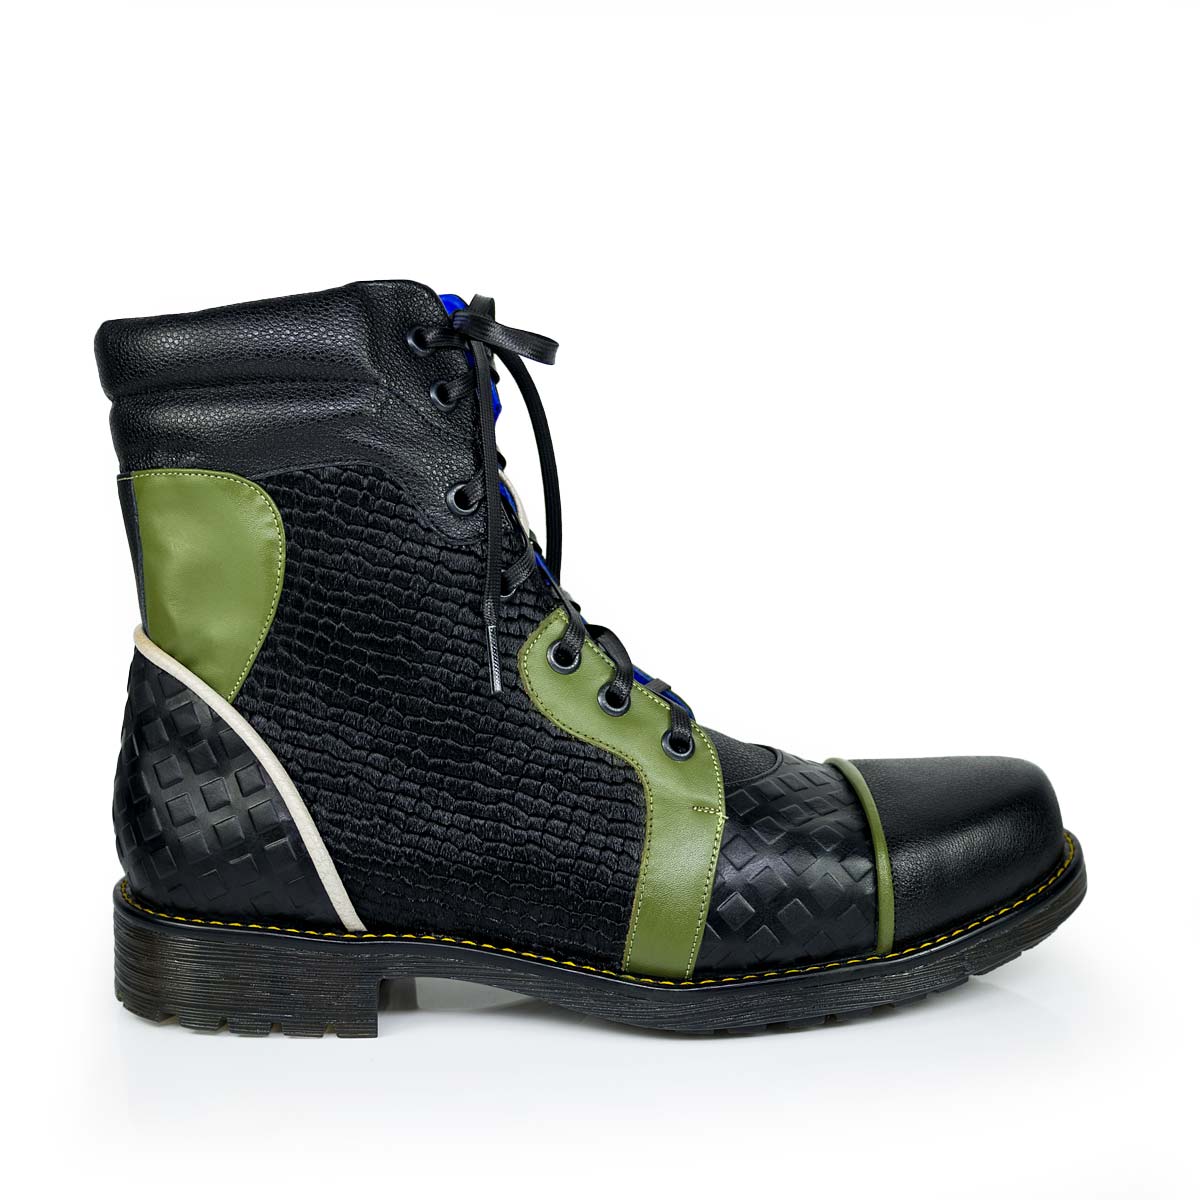 Musk jade men's ankle boots